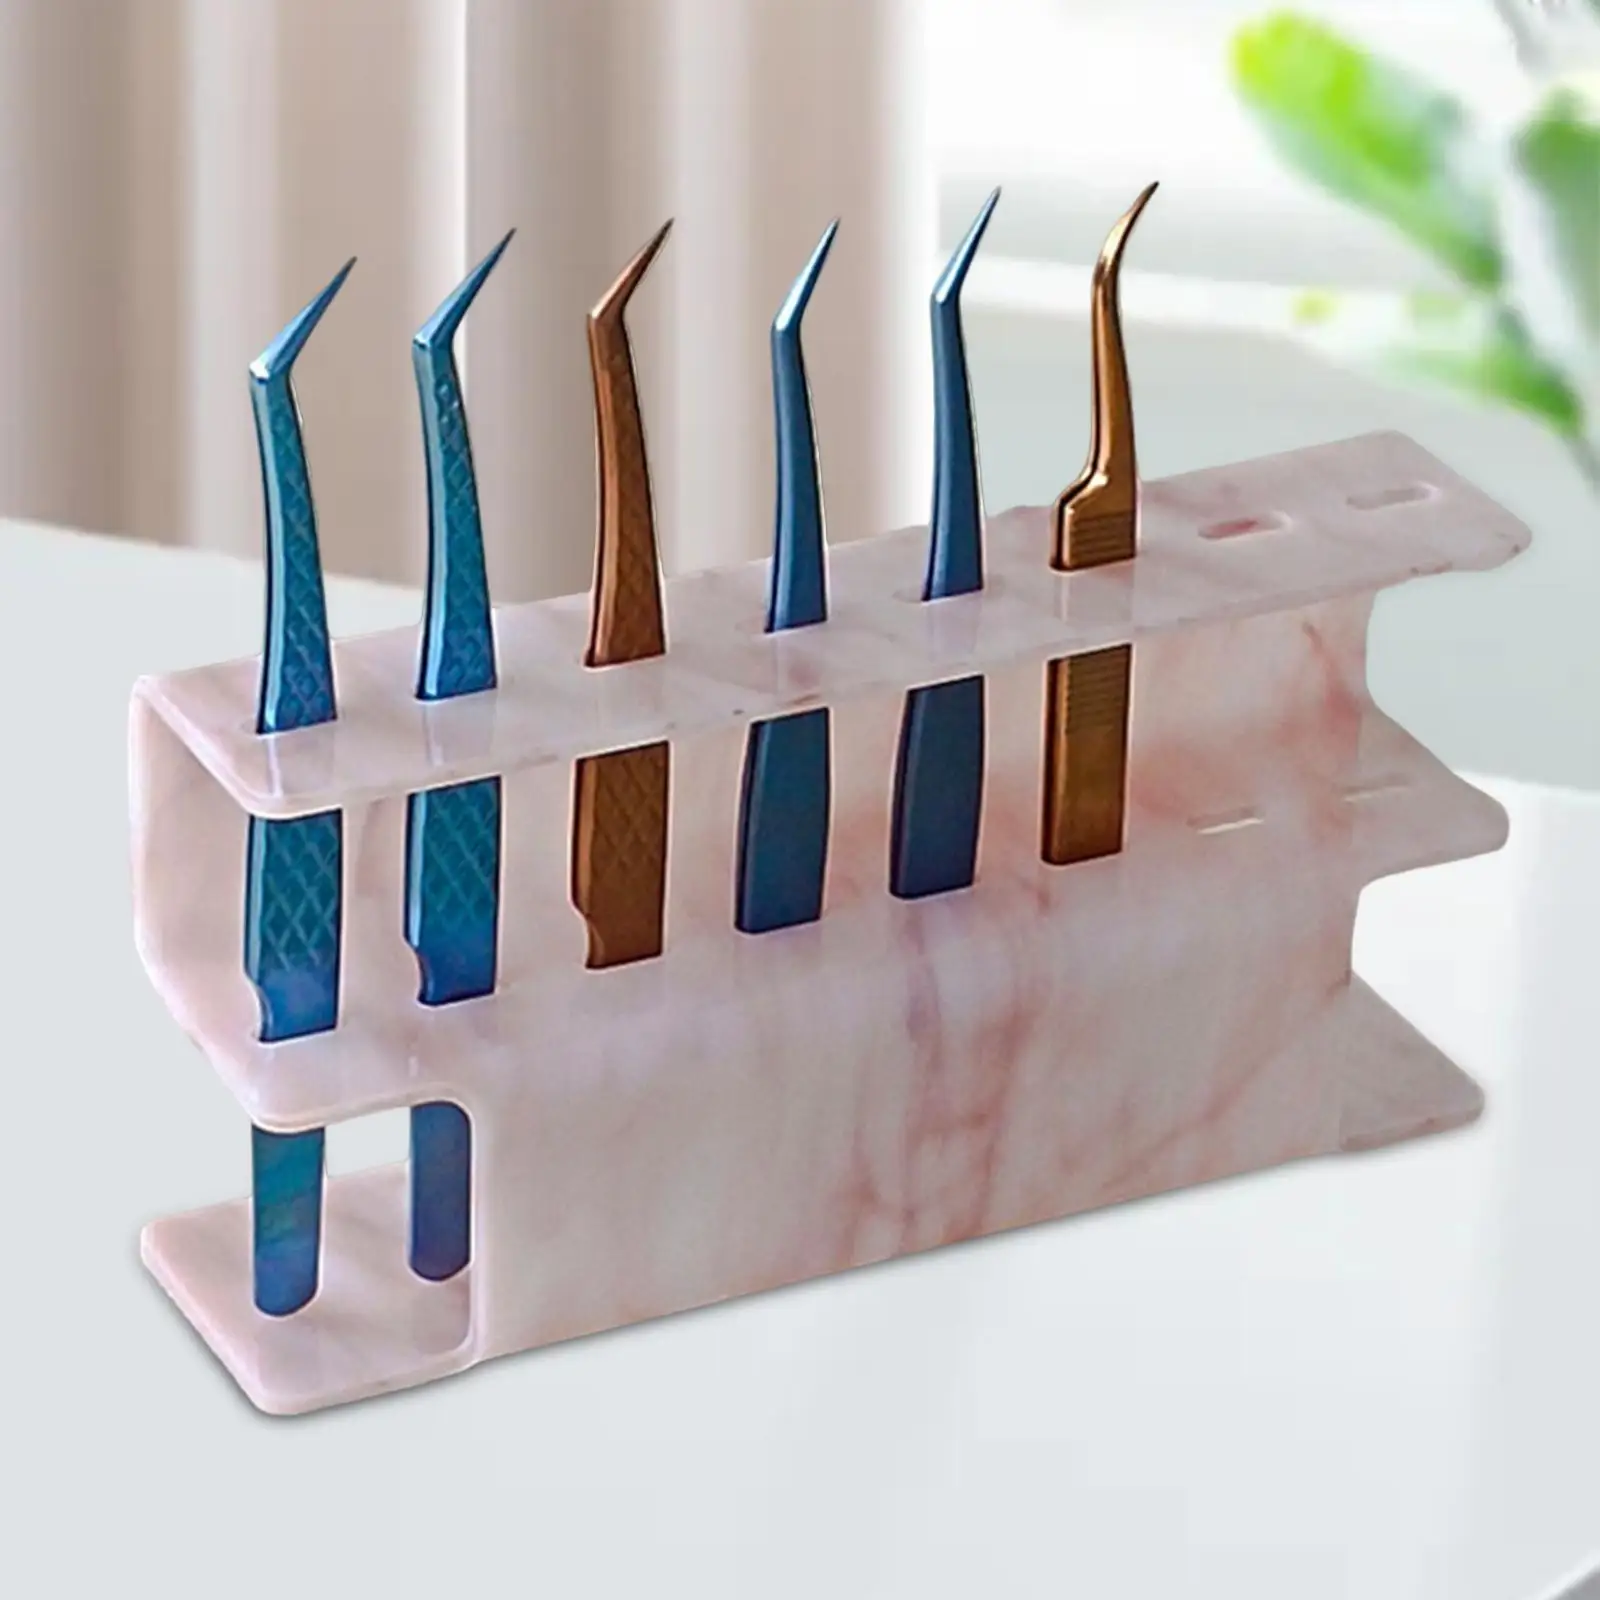 8 Holes Display Stand Make up Supplies Stand Shelf Display Stand Holder Organizer for Home